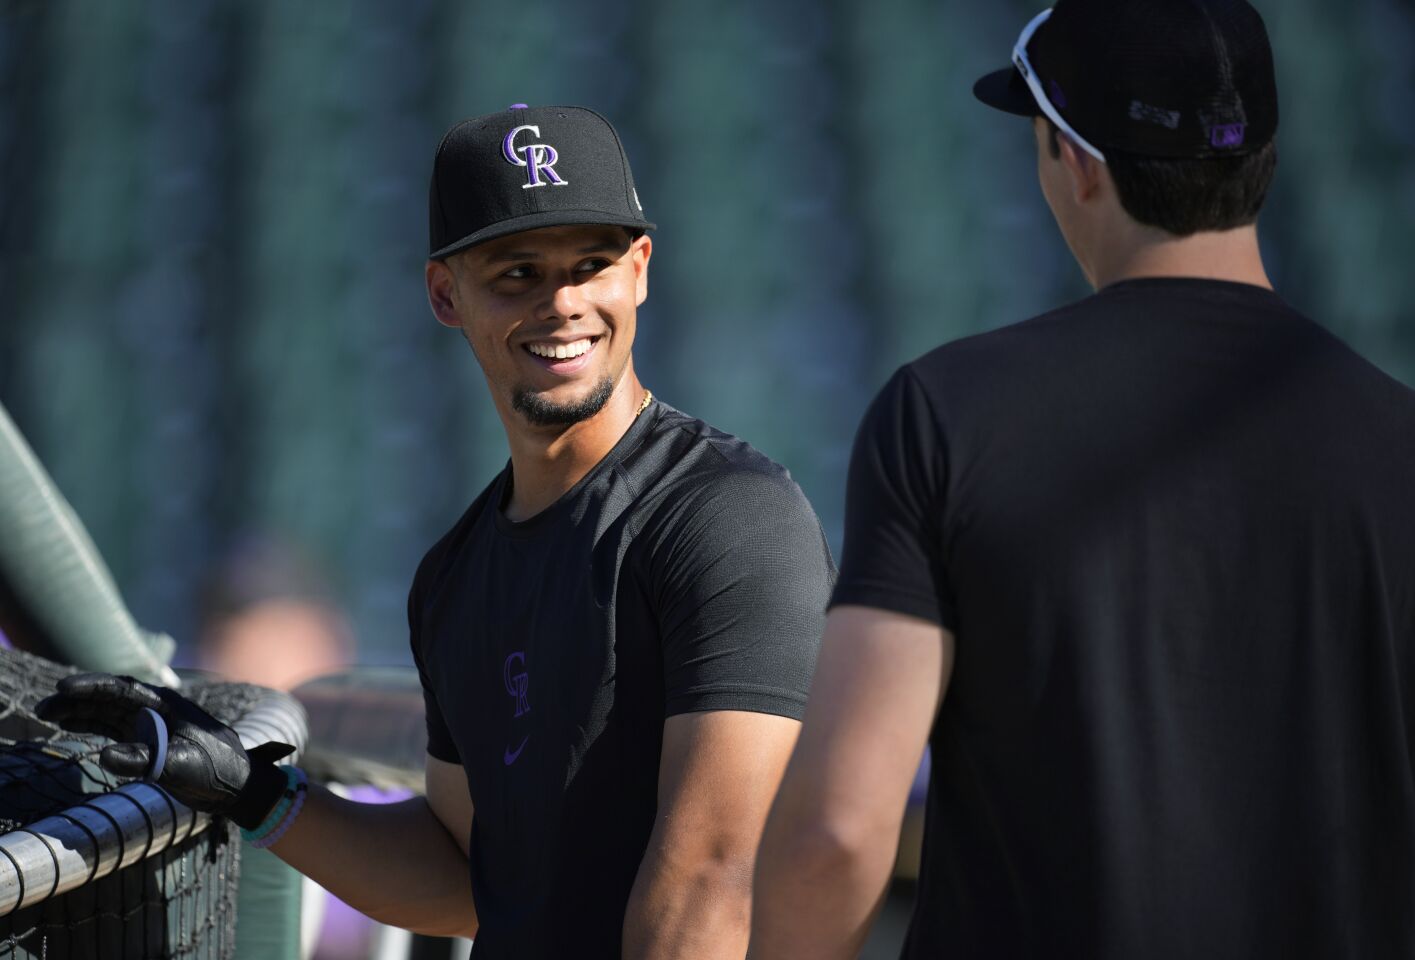 24 | Colorado Rockies (66-93; LW: 23)This is a rough first impression if Ezequiel Tovar (.555 OPS over seven games) is going to succeed Troy Tulowitzki and Trevor Story as the next great Rockies shortstop.